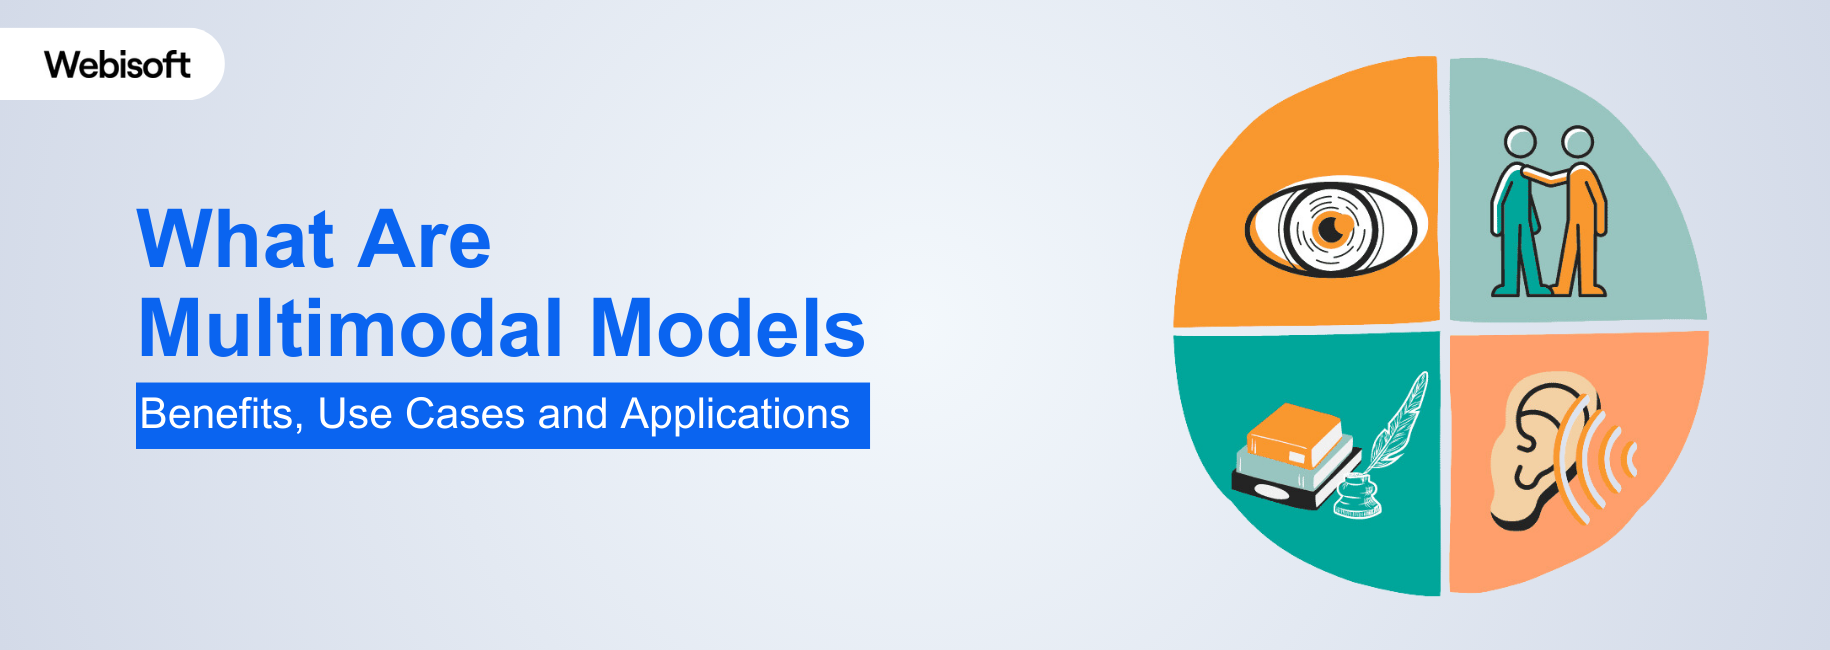 What Are Multimodal Models: Benefits, Use Cases and Applications